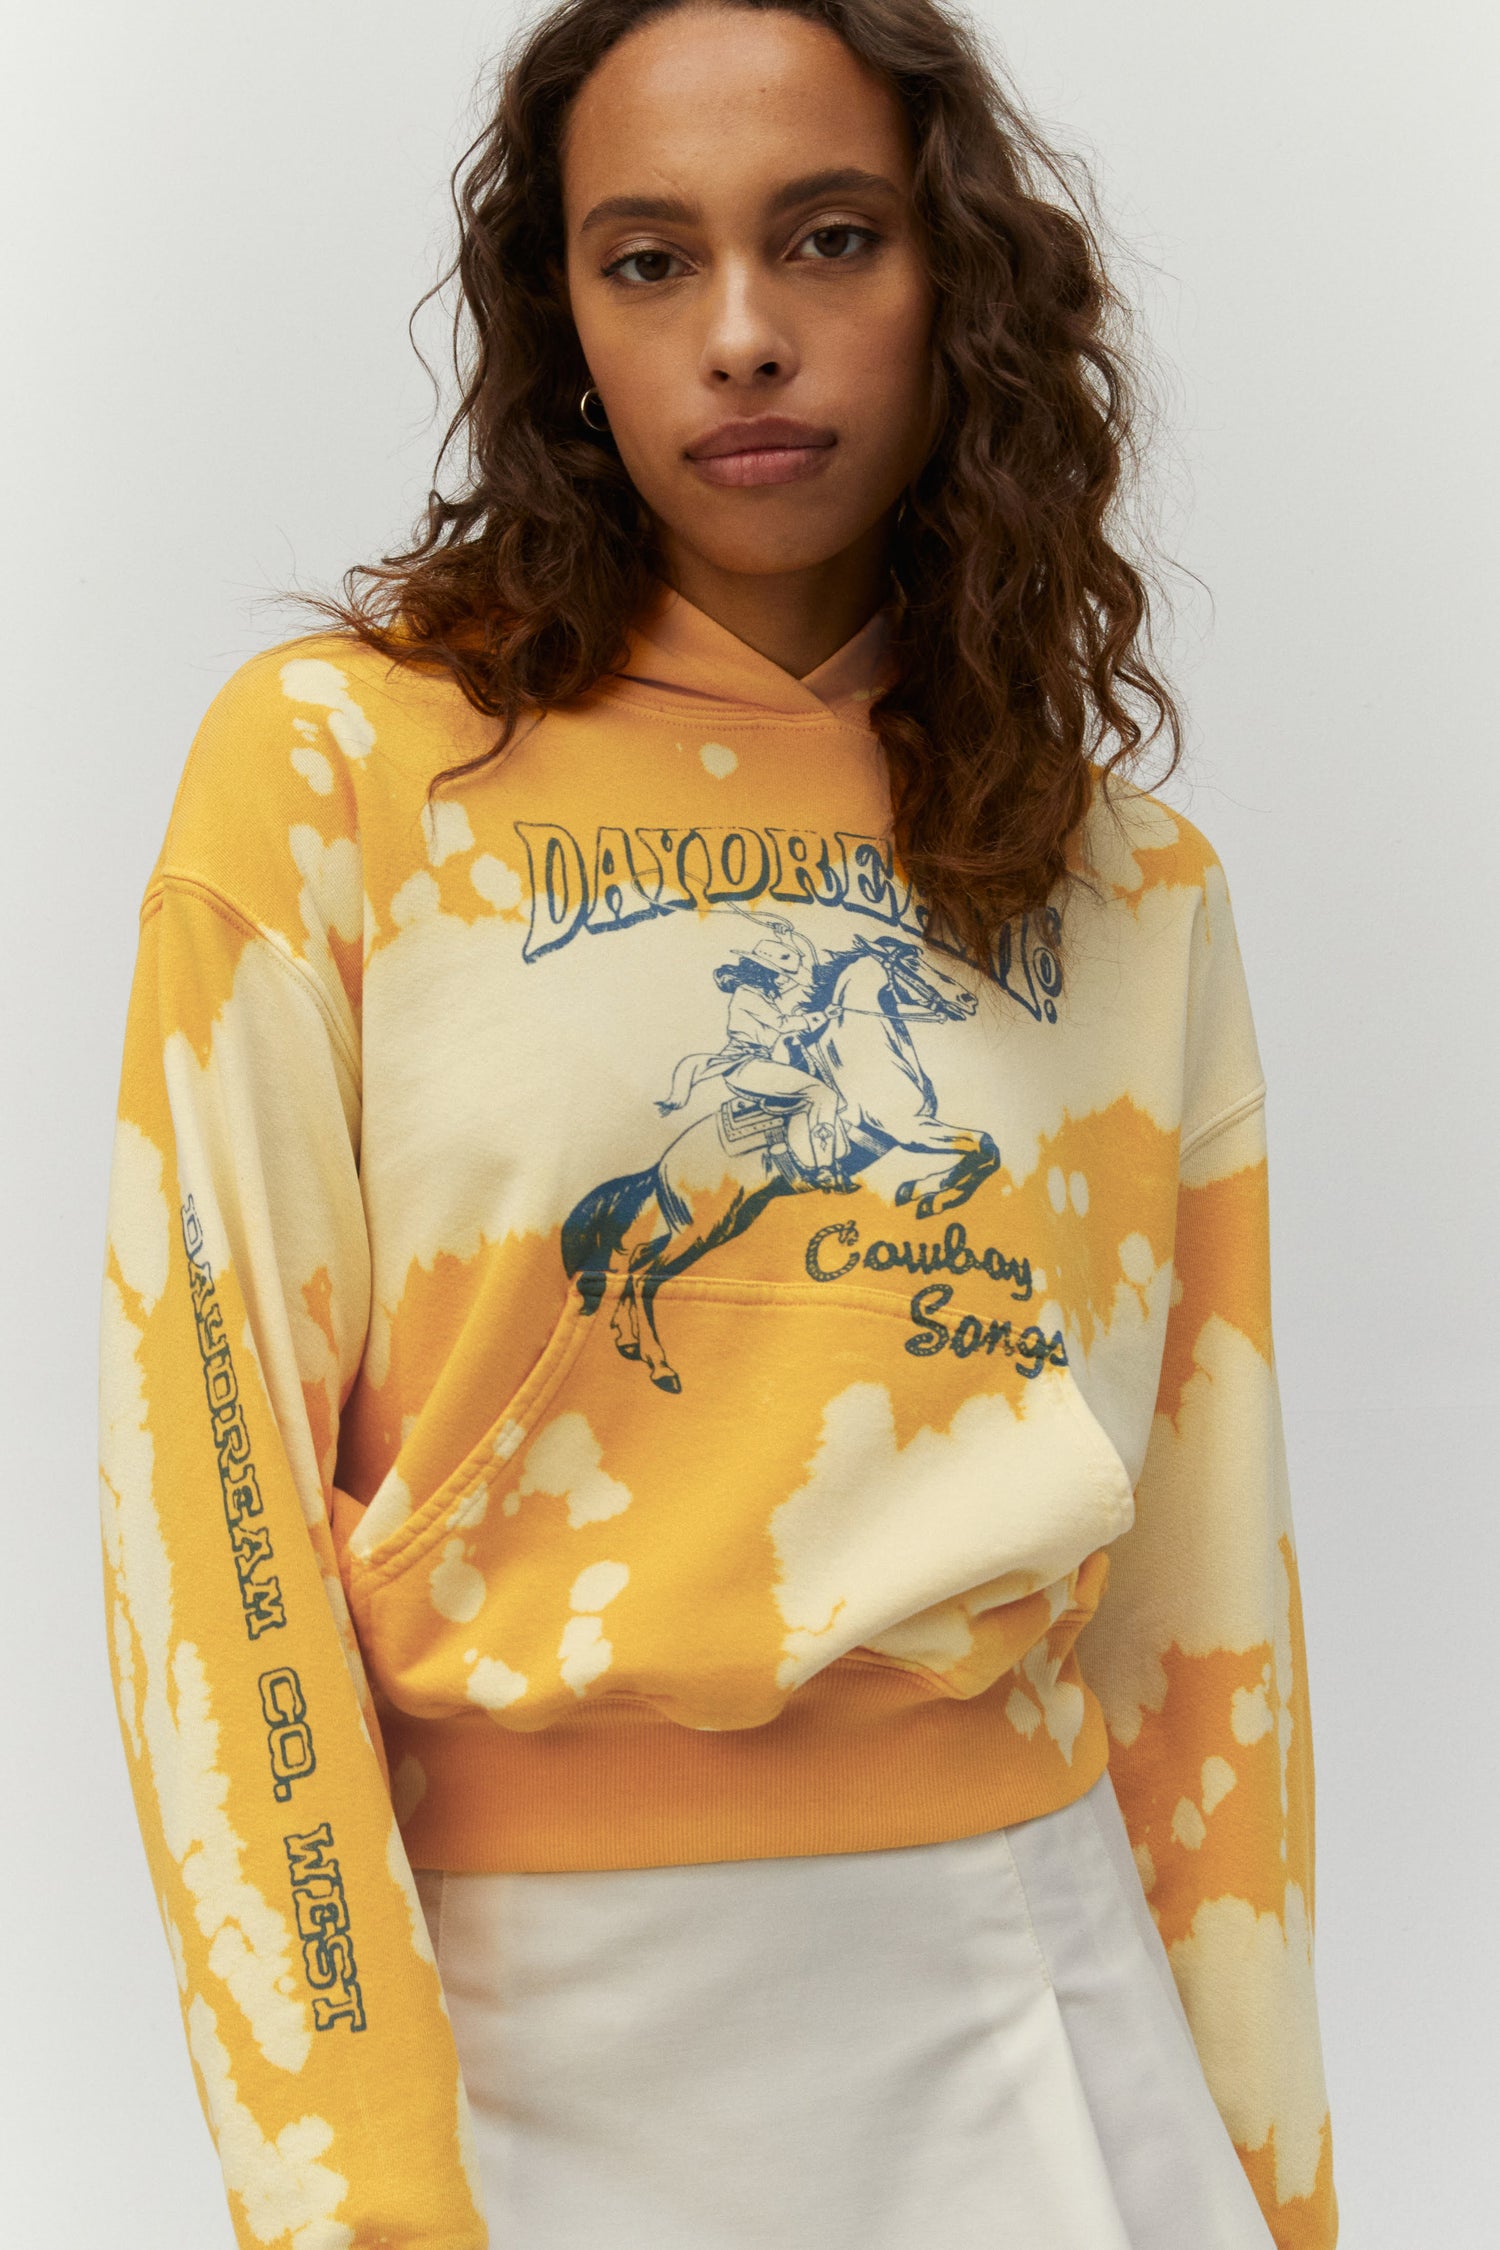 Daydream and Cowboy Songs hoodie